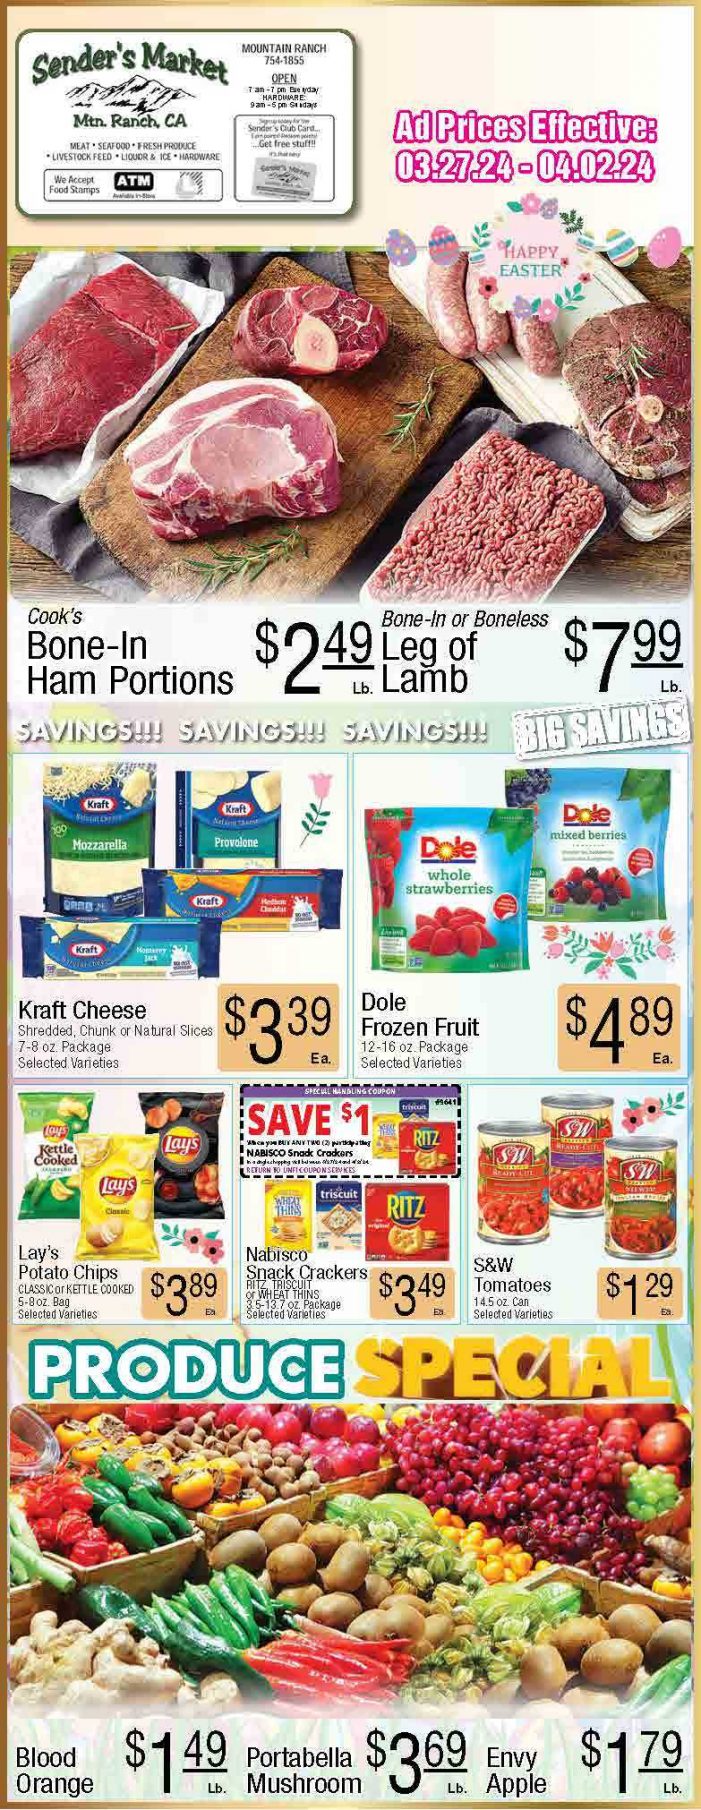 Sender’s Market Weekly Ad & Grocery Specials Through April 2nd! Shop Local & Save!!